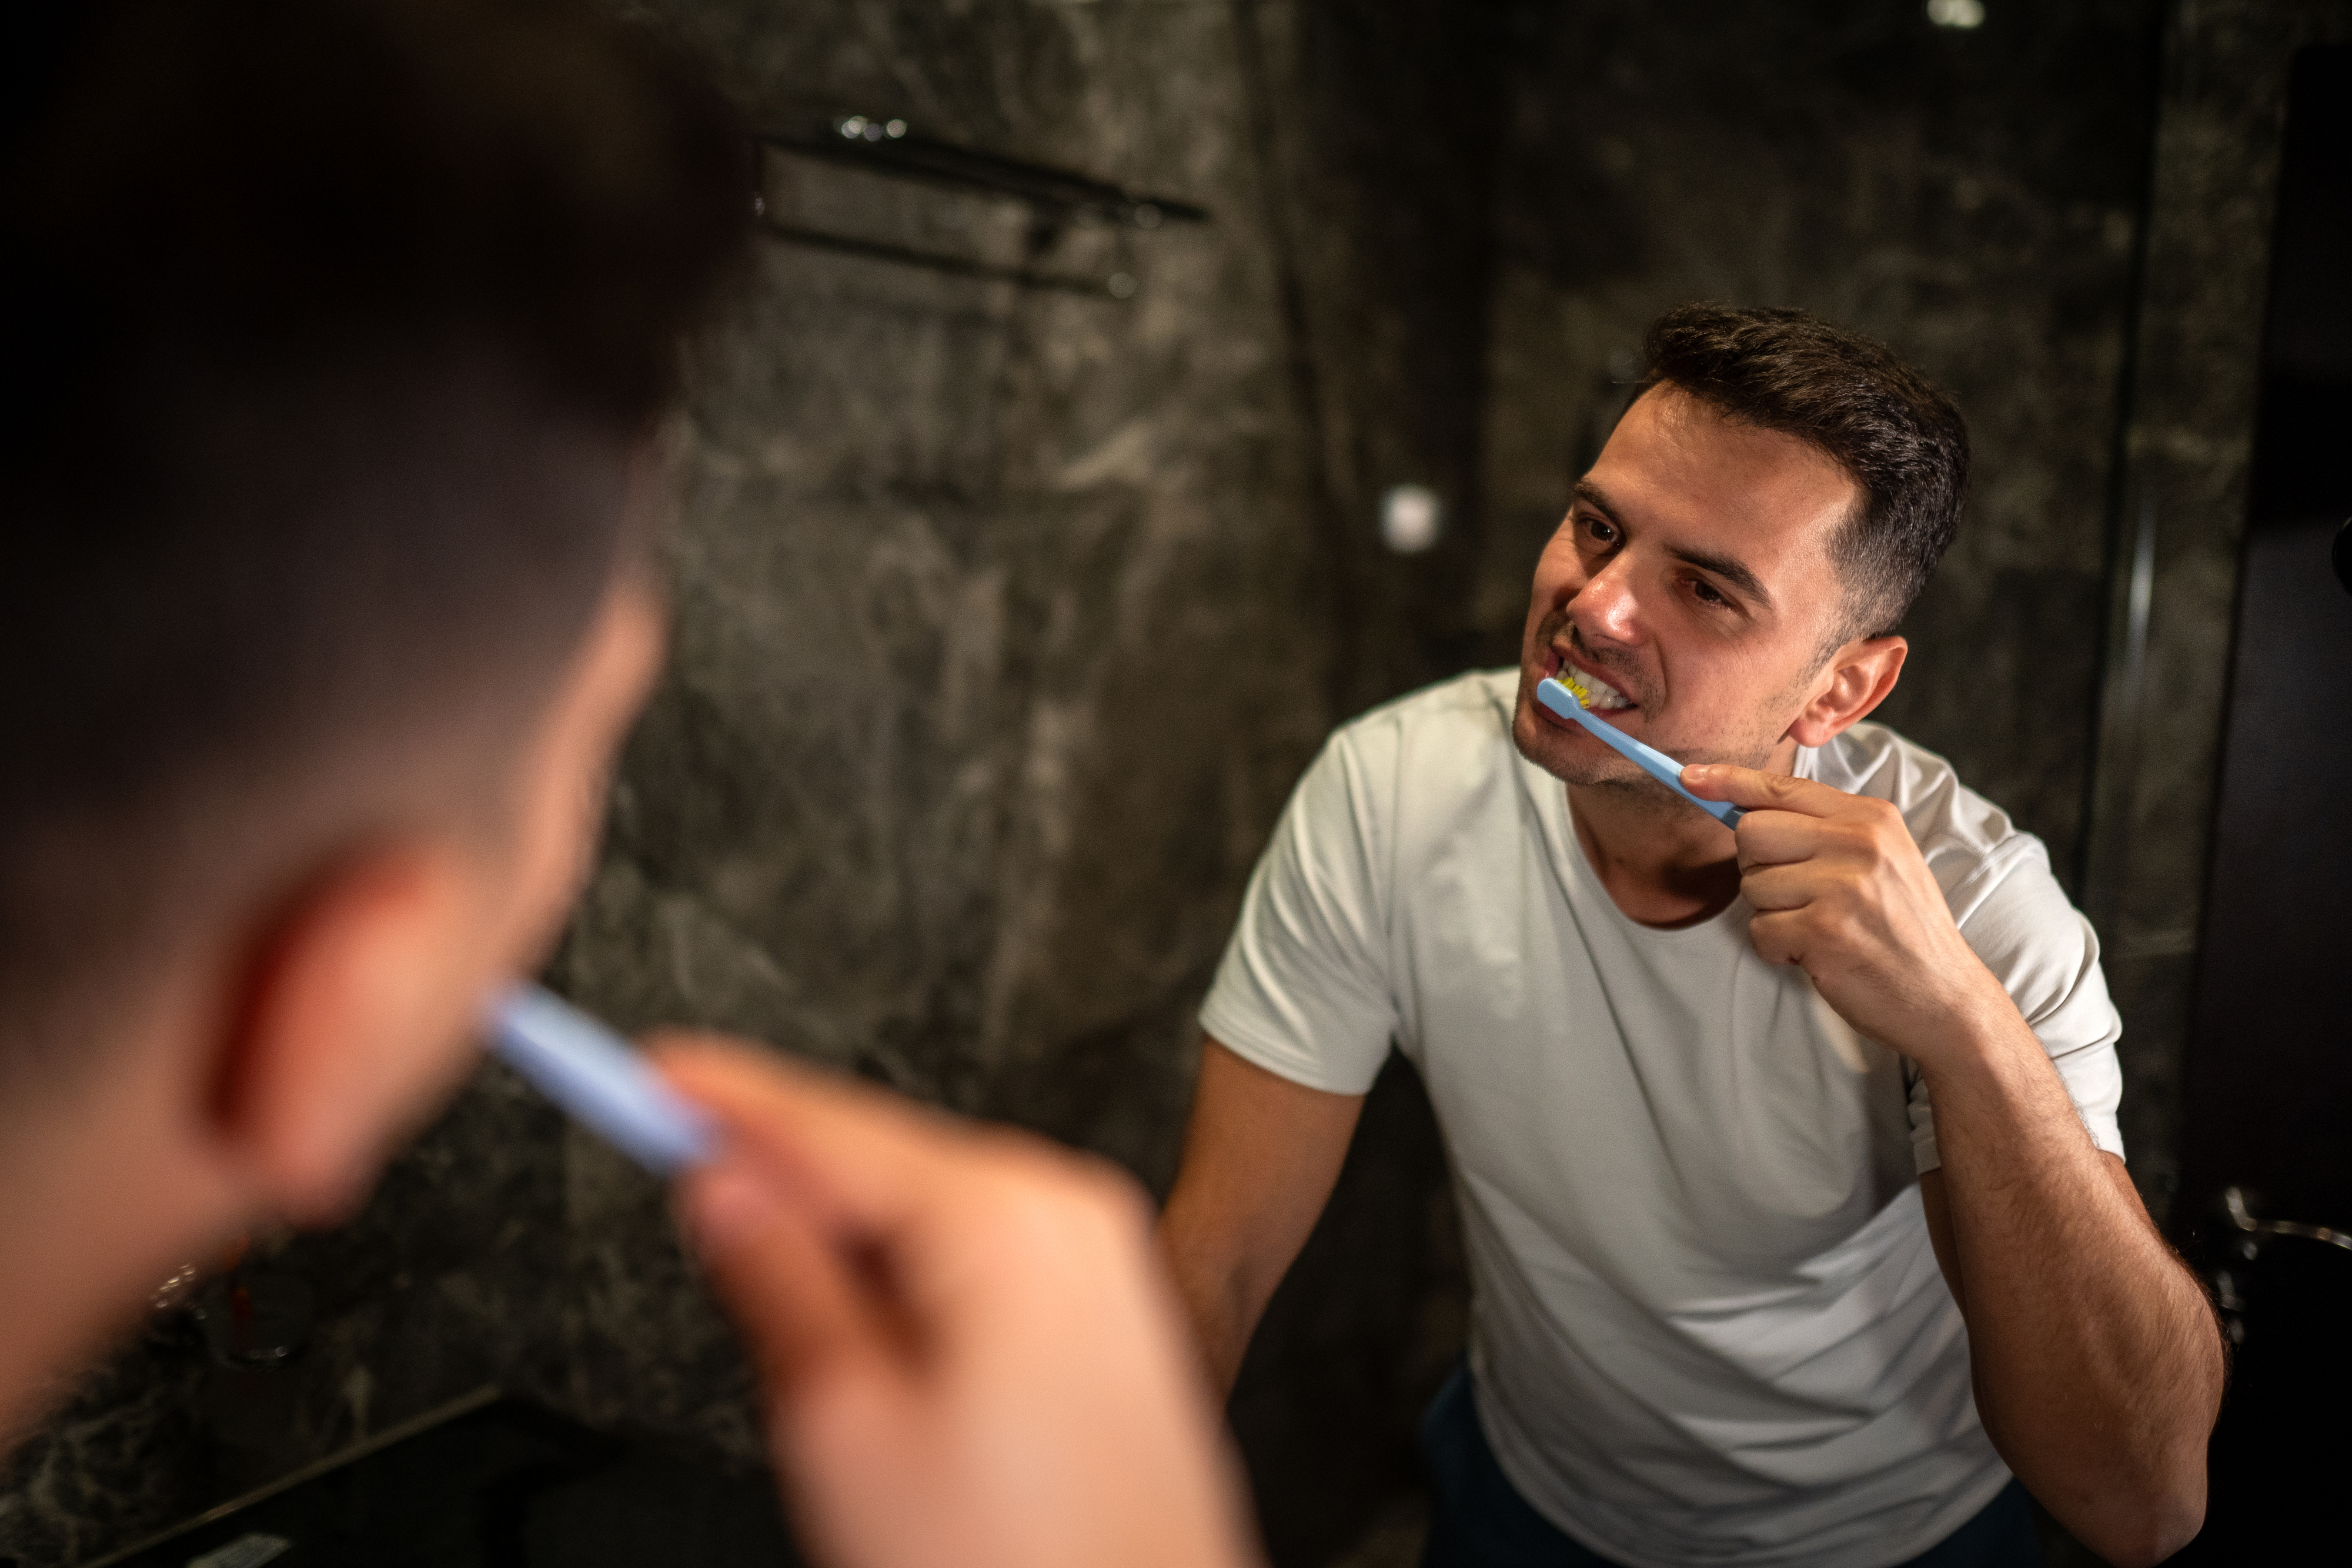 Man in a white shirt brushes his teeth reflected in a mirror in a bathroom setting